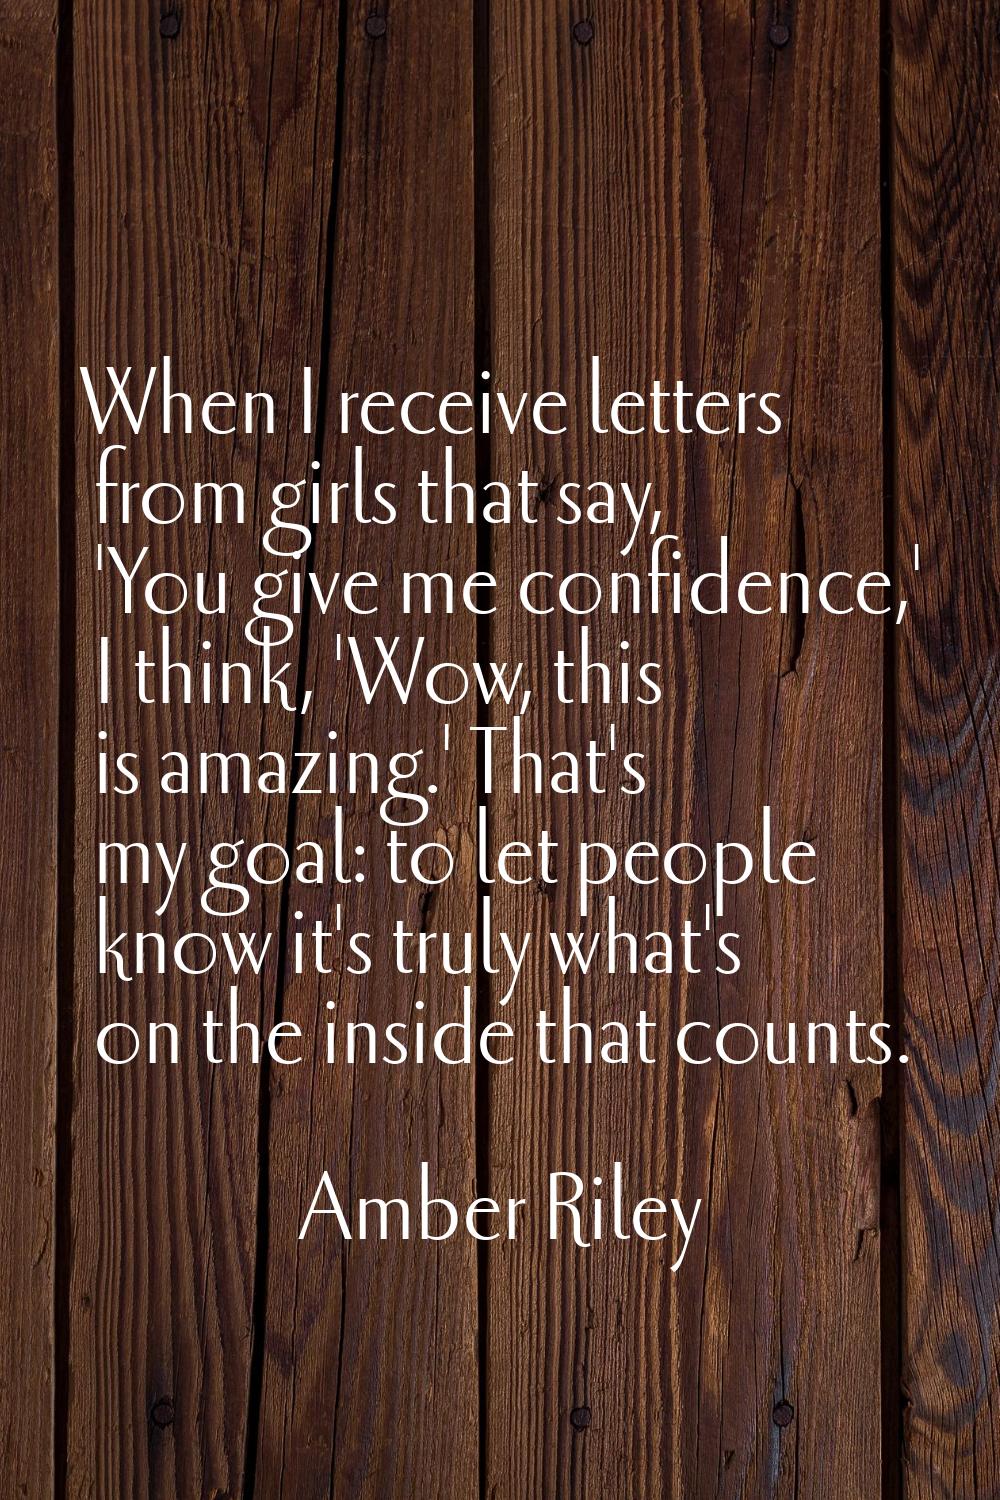 When I receive letters from girls that say, 'You give me confidence,' I think, 'Wow, this is amazin